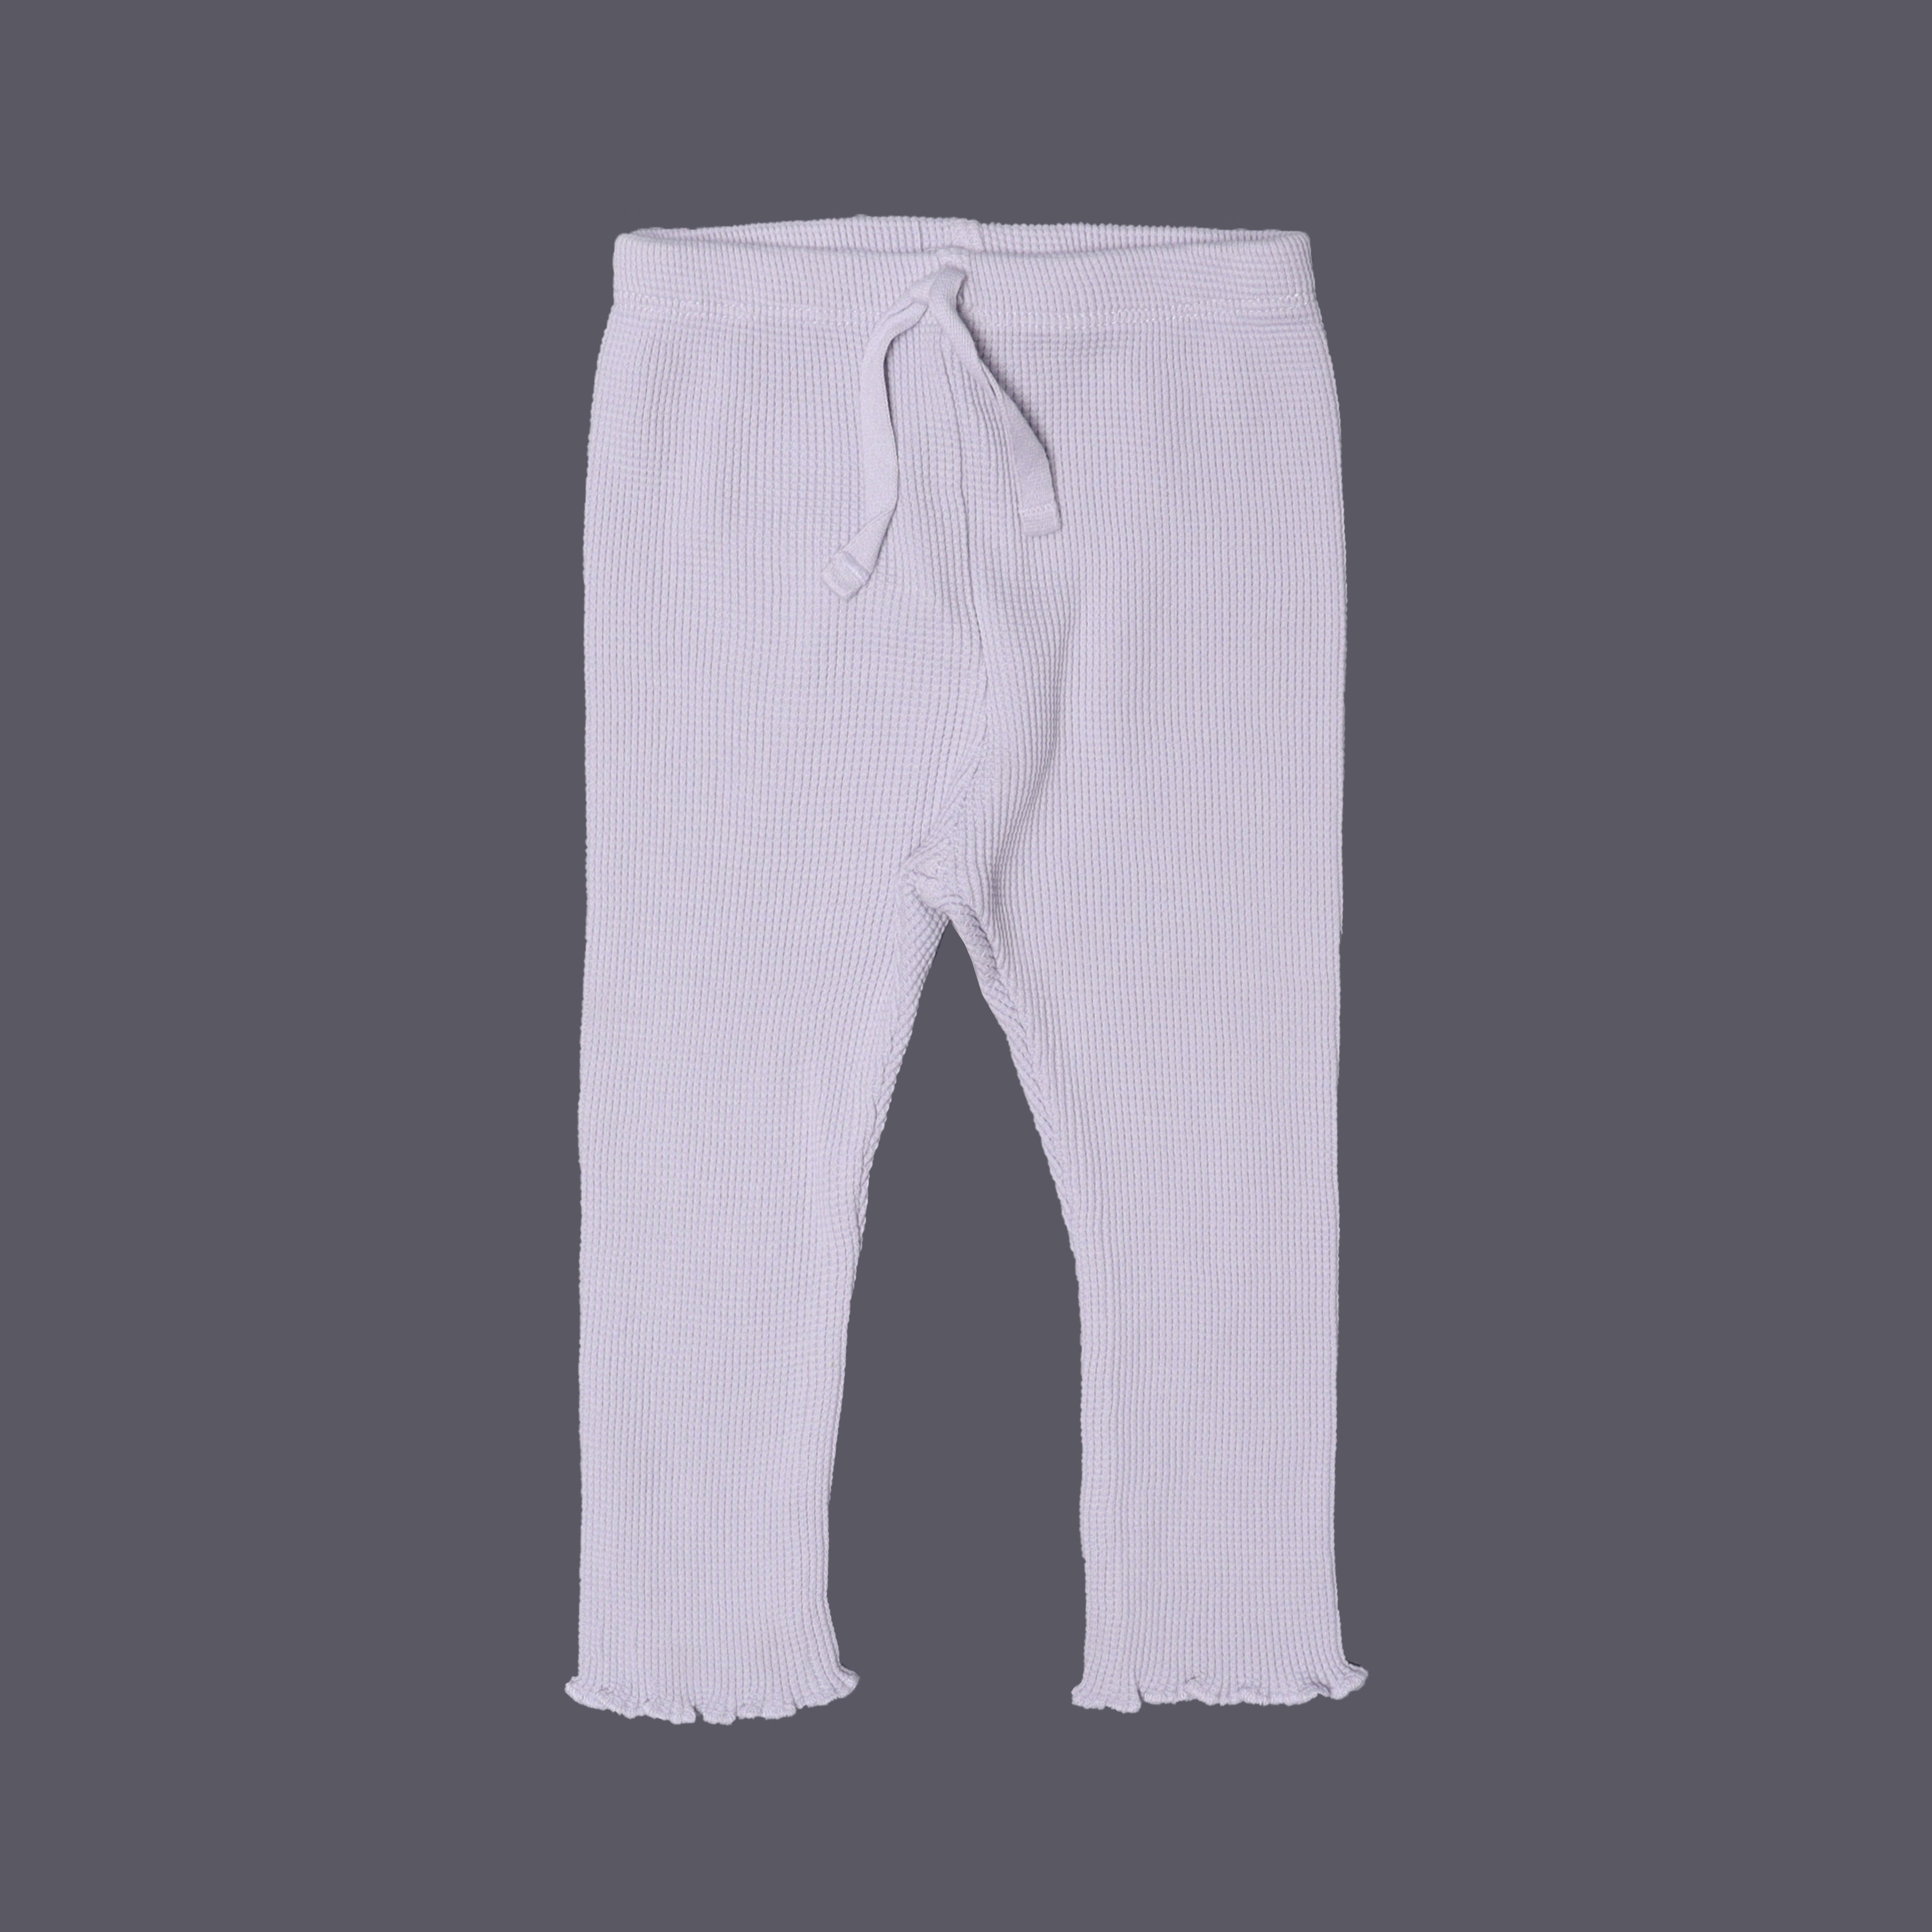 LIGHT BLUE WITH KNOT BOTTOM FRIL THERMAL FABRIC PLAIN PAJAMA TROUSER